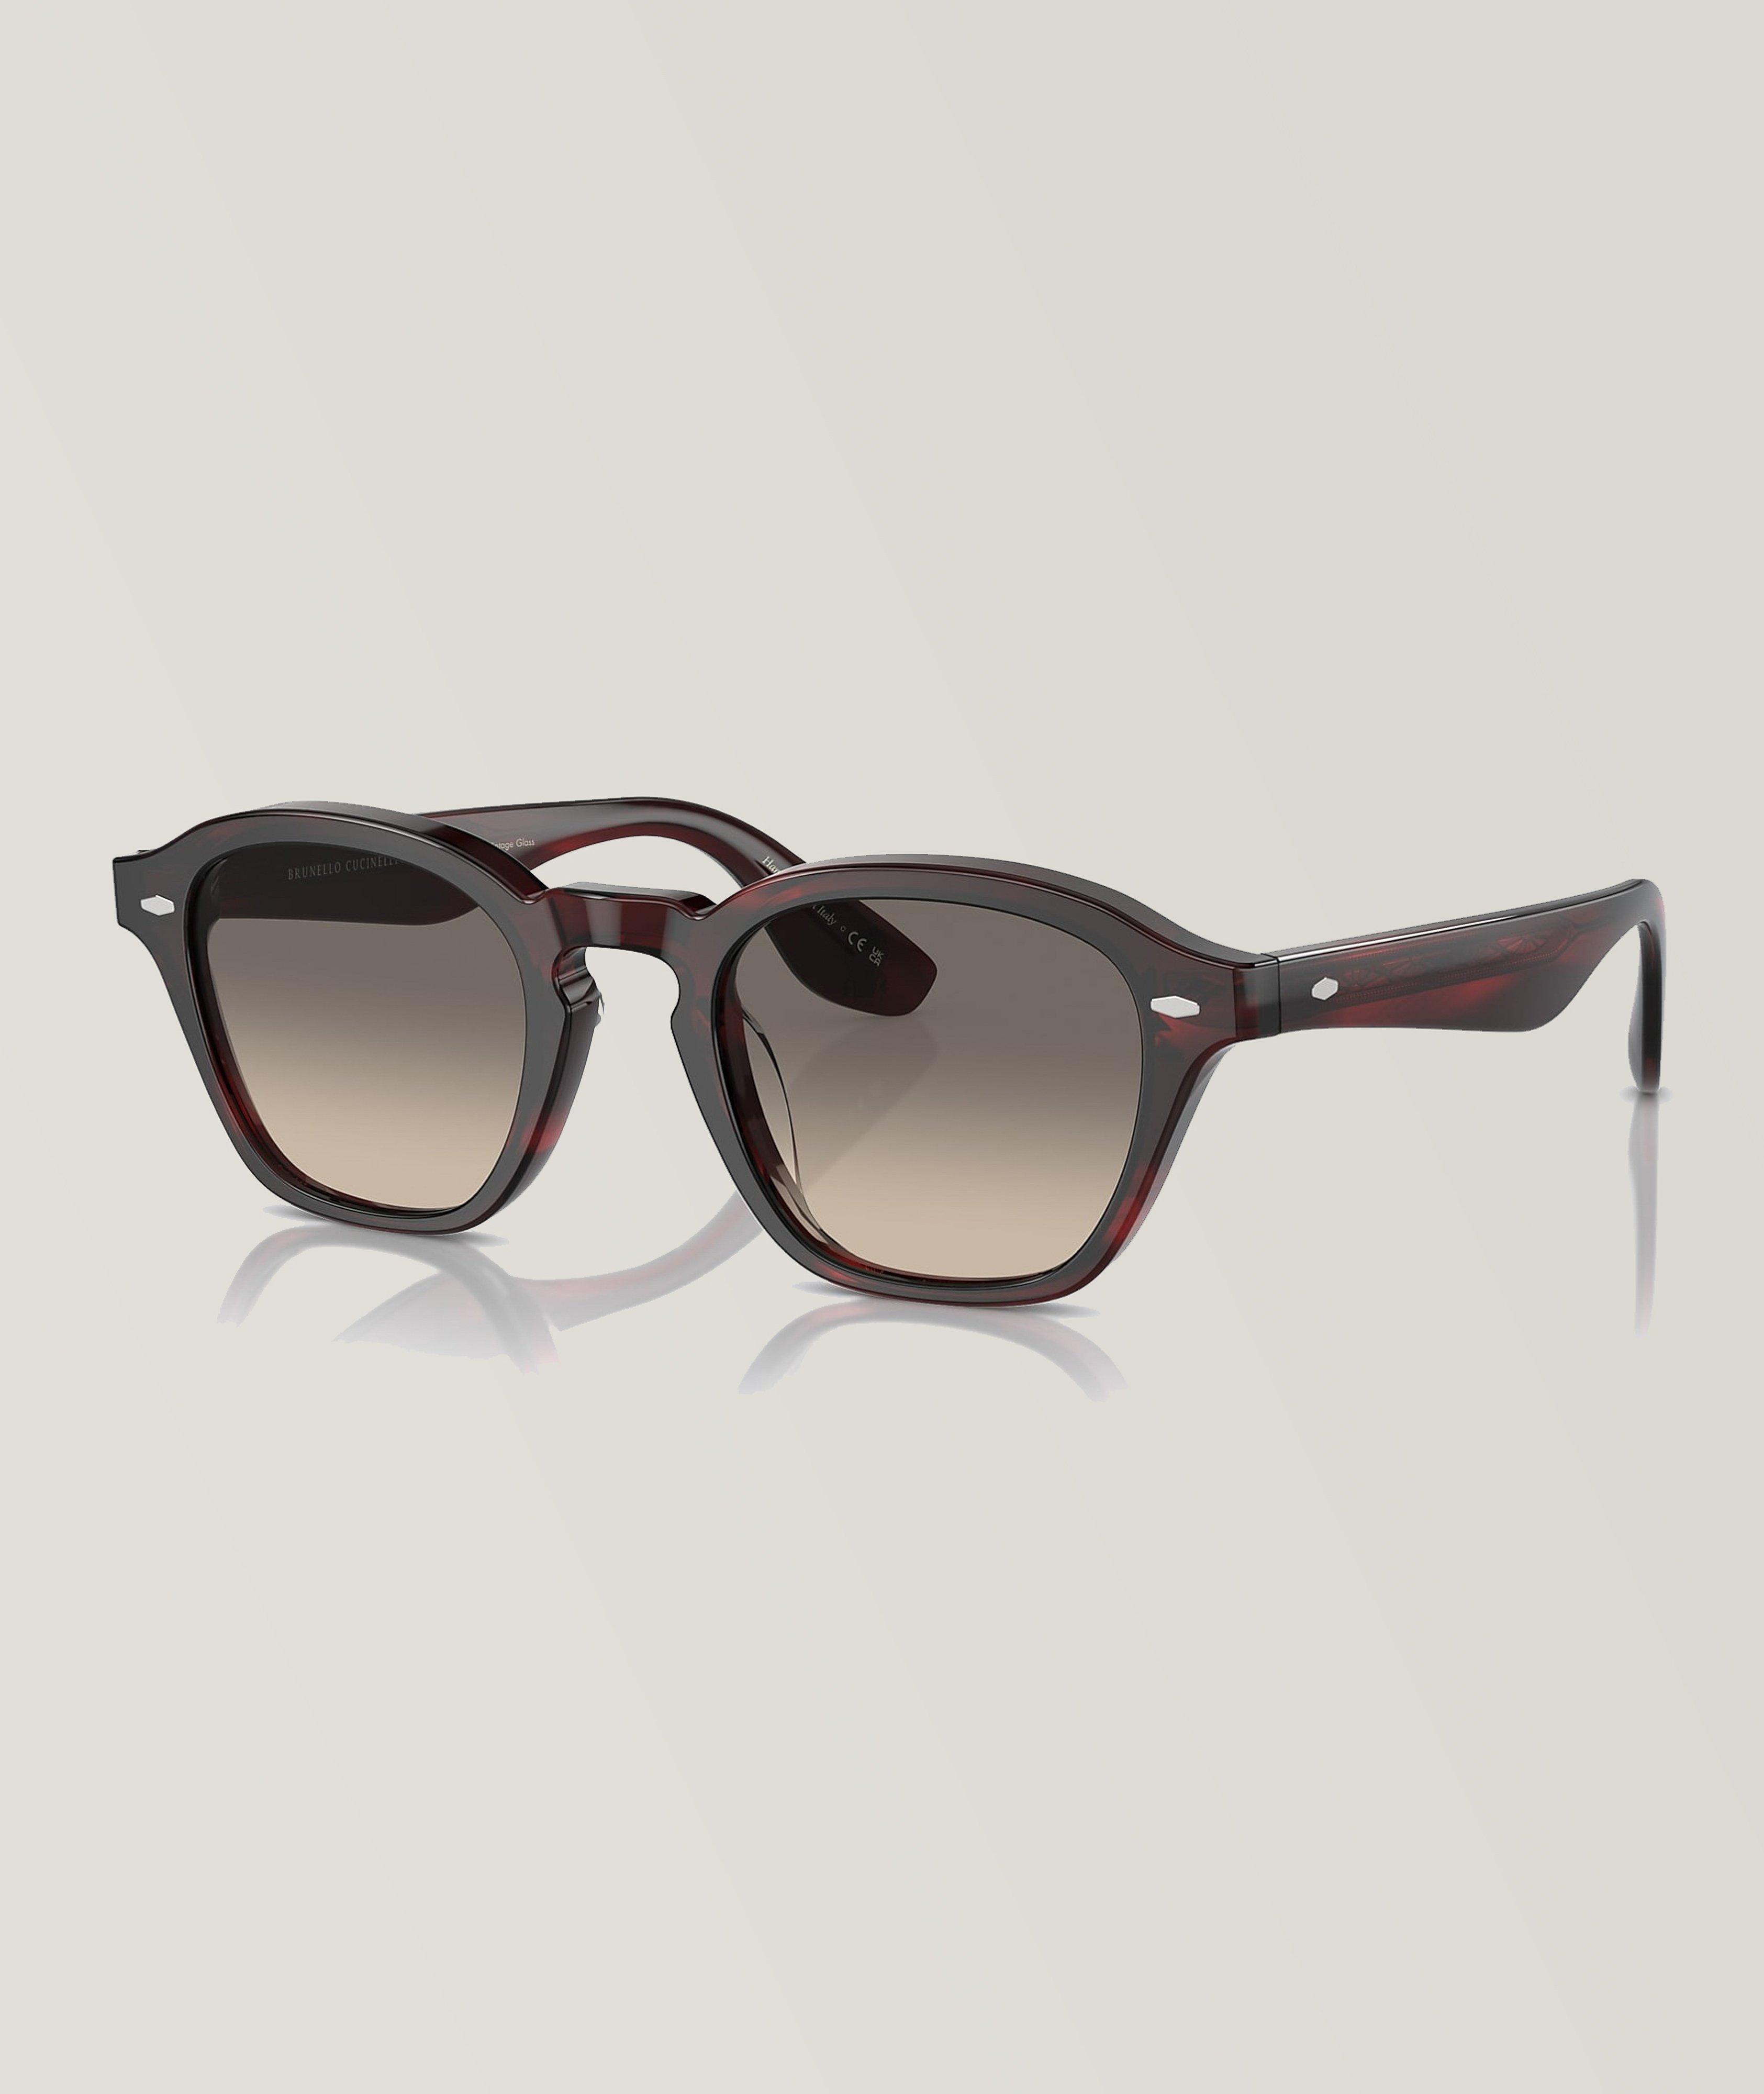 Brunello Cucinelli Oliver Peoples Collab Peppe Sunglasses 